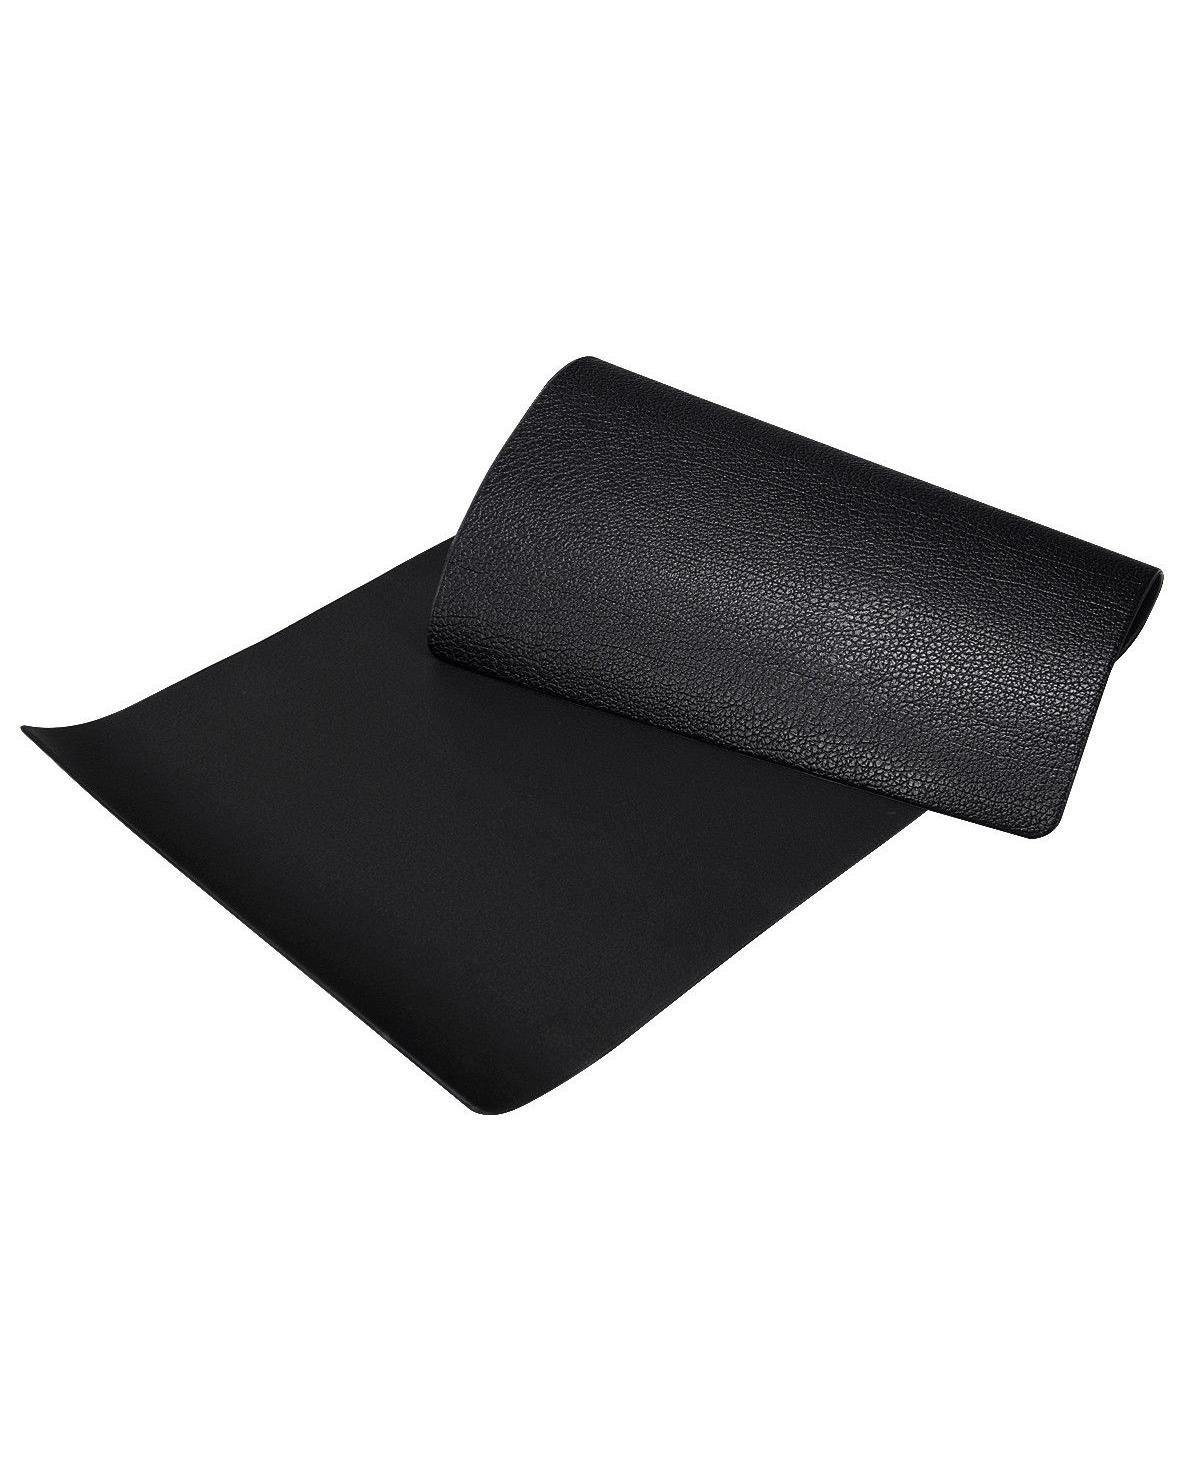 Slickblue Thicken Equipment Mat for Home and Gym Use-47 x 24 x 0.3 inches - Black